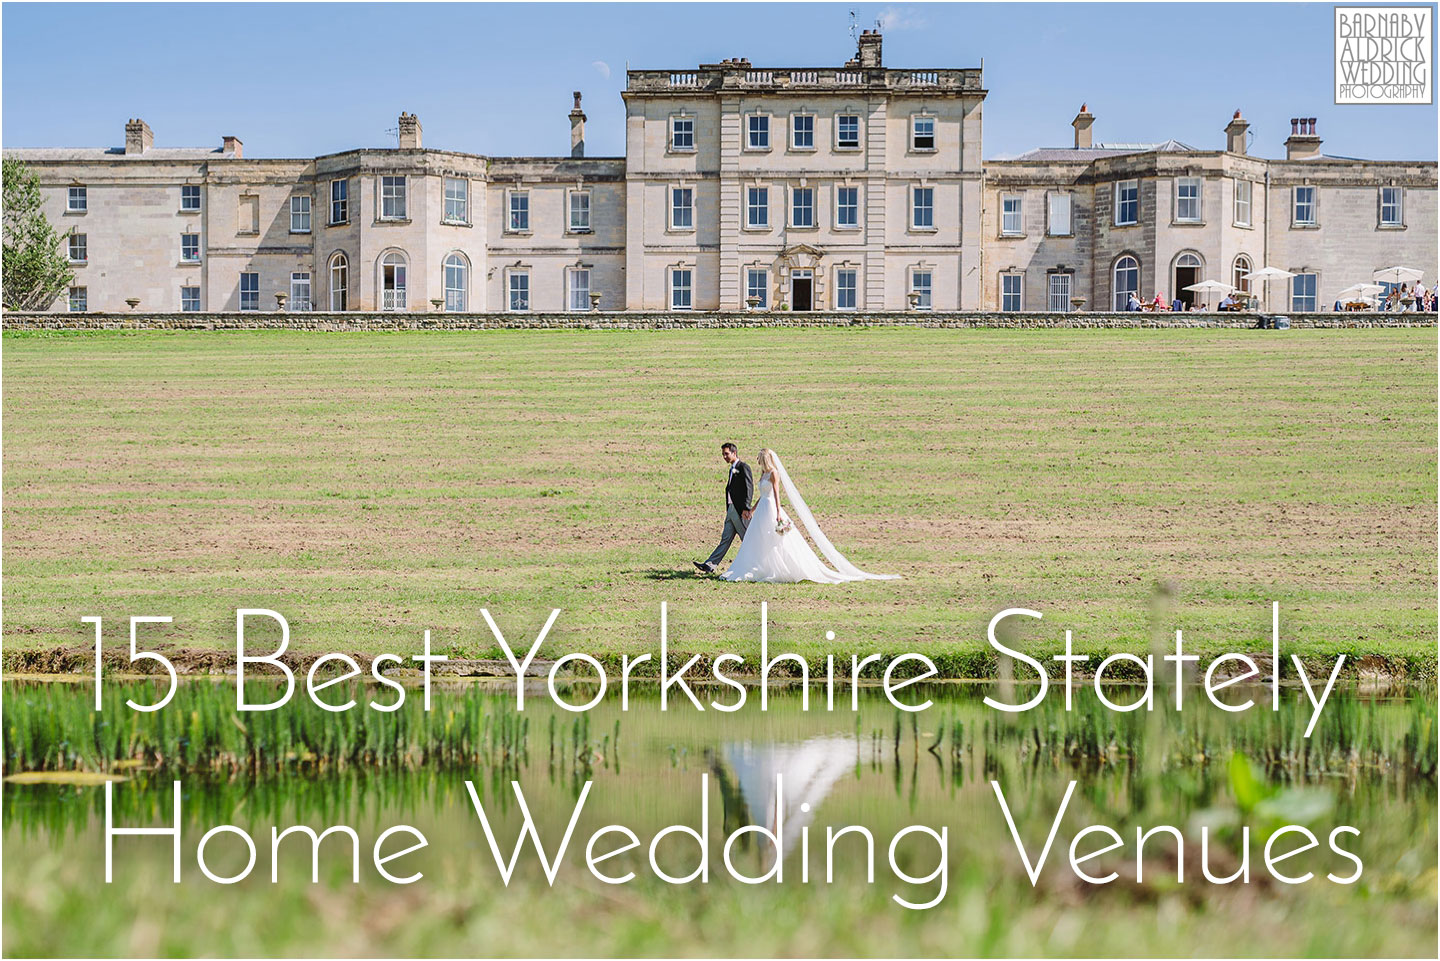 Top 15 Best Yorkshire Stately Home Wedding Venues, Top 15 Best Yorkshire Country House Wedding Venues, Best Country House Wedding Venues in Yorkshire, UK Best Stately Homes for weddings